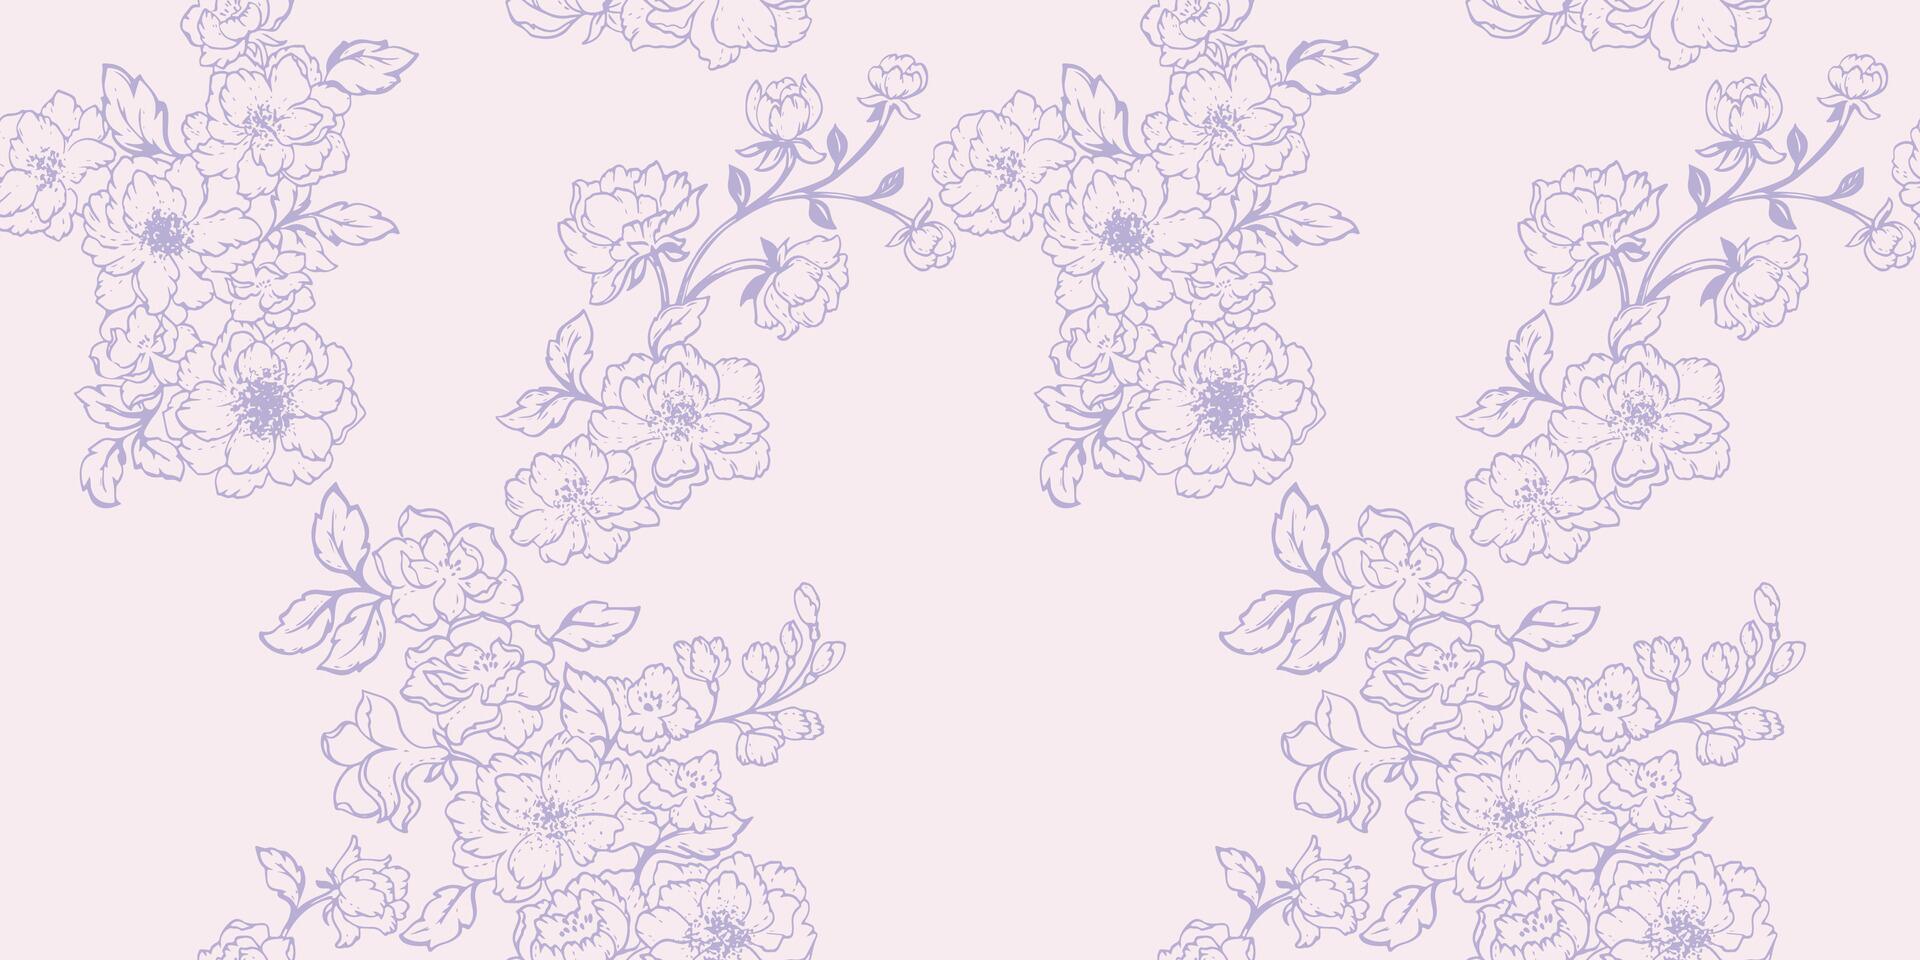 Seamless abstract artistic simple branches flowers pattern. Pastel light stylized floral background. Vector hand drawn sketch lines, outlines. Template for textile, fashion, printing, fabric